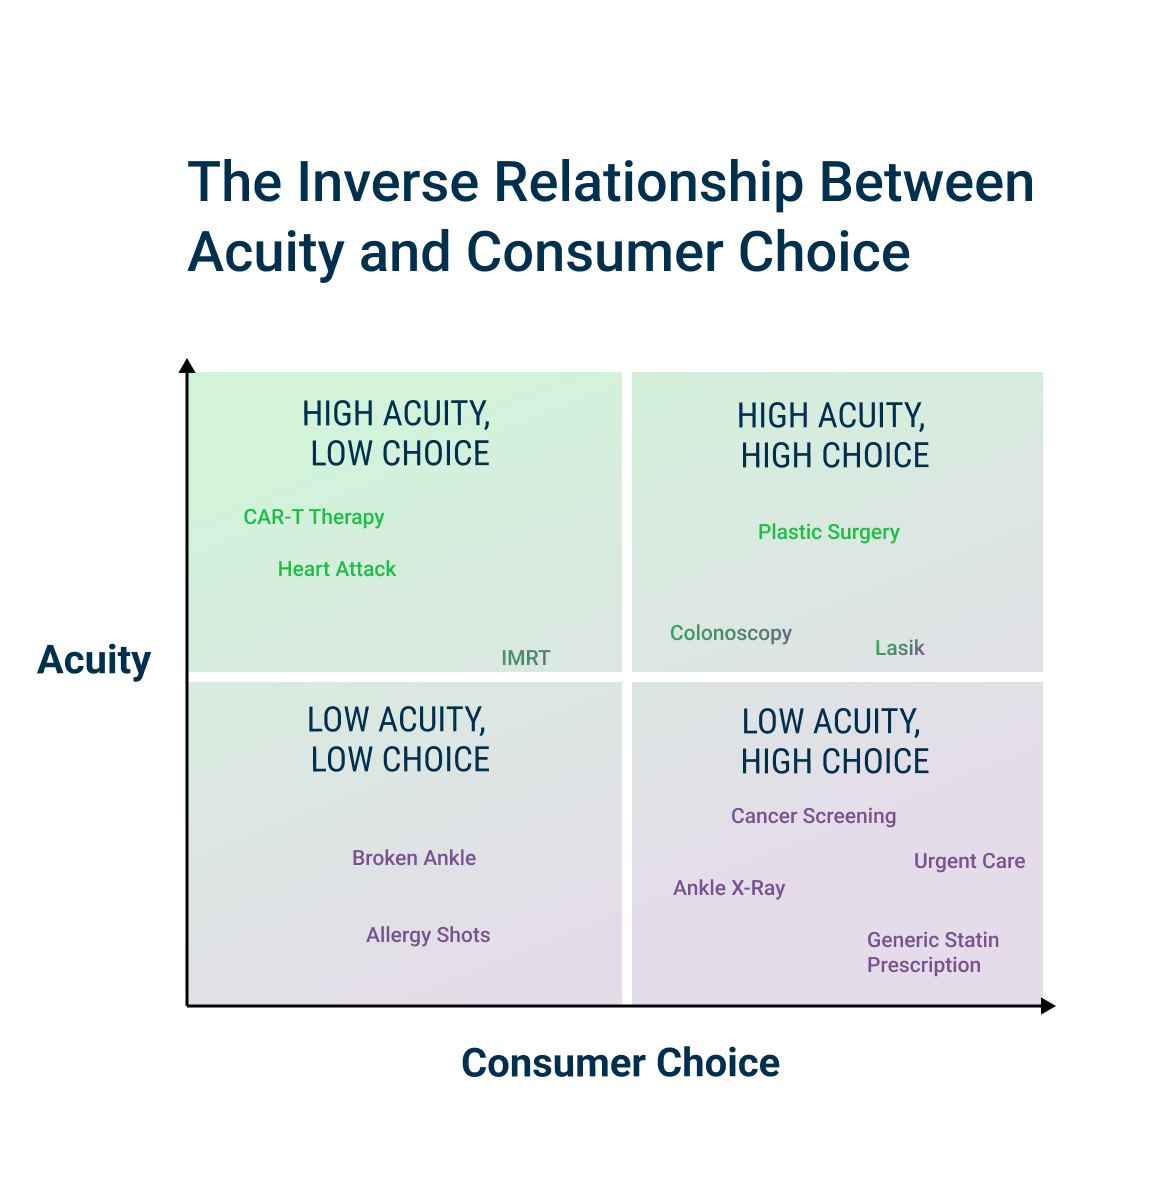 A quadrant chart comparing acuity and consumer choice, showing a selection of procedures placed throughout.